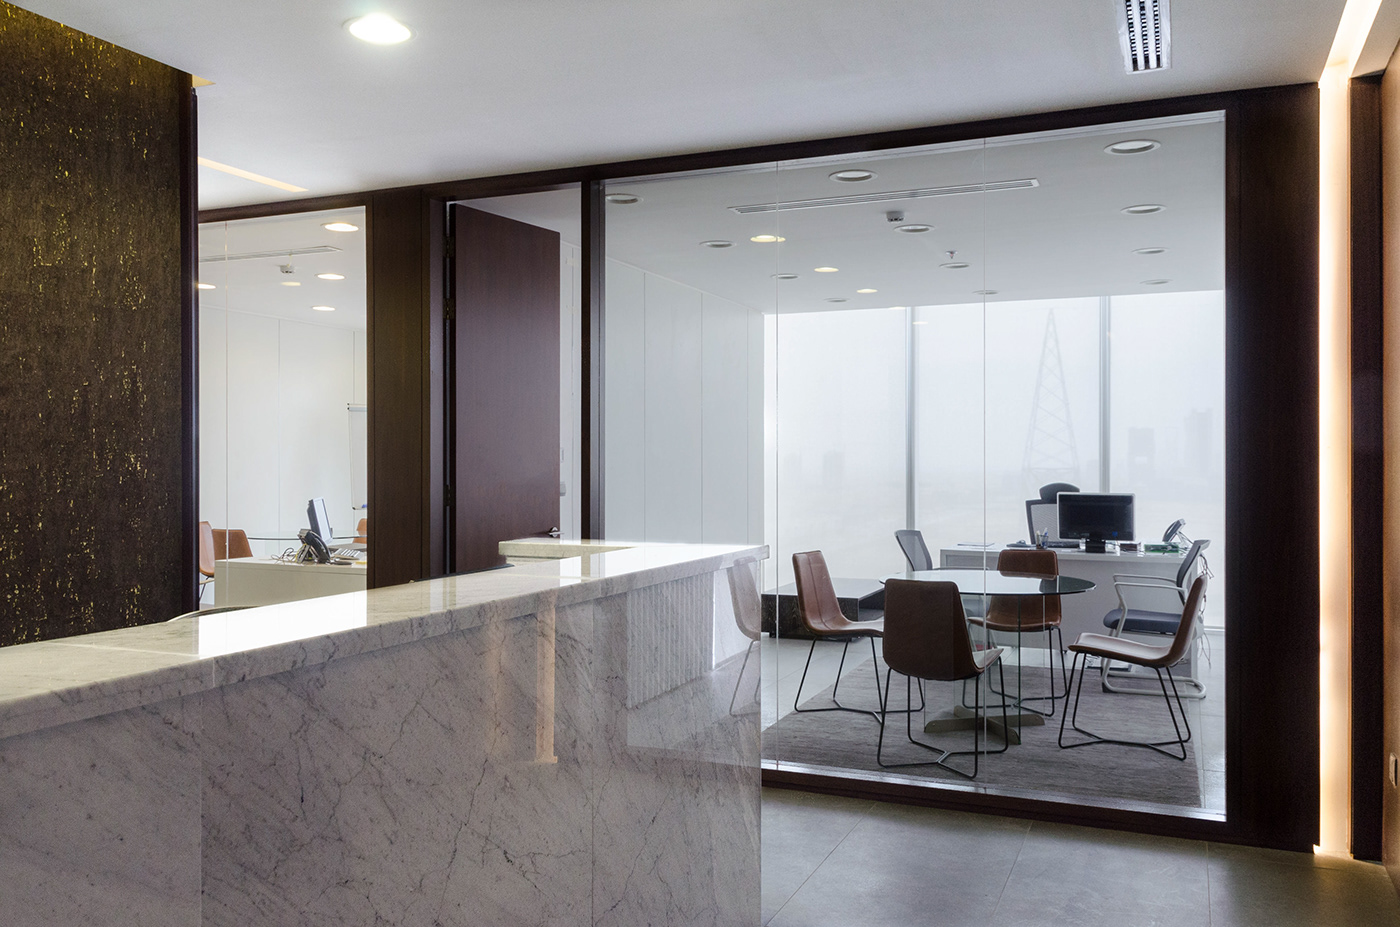 offices design interior design  law firm law offices architecture commercial design modern